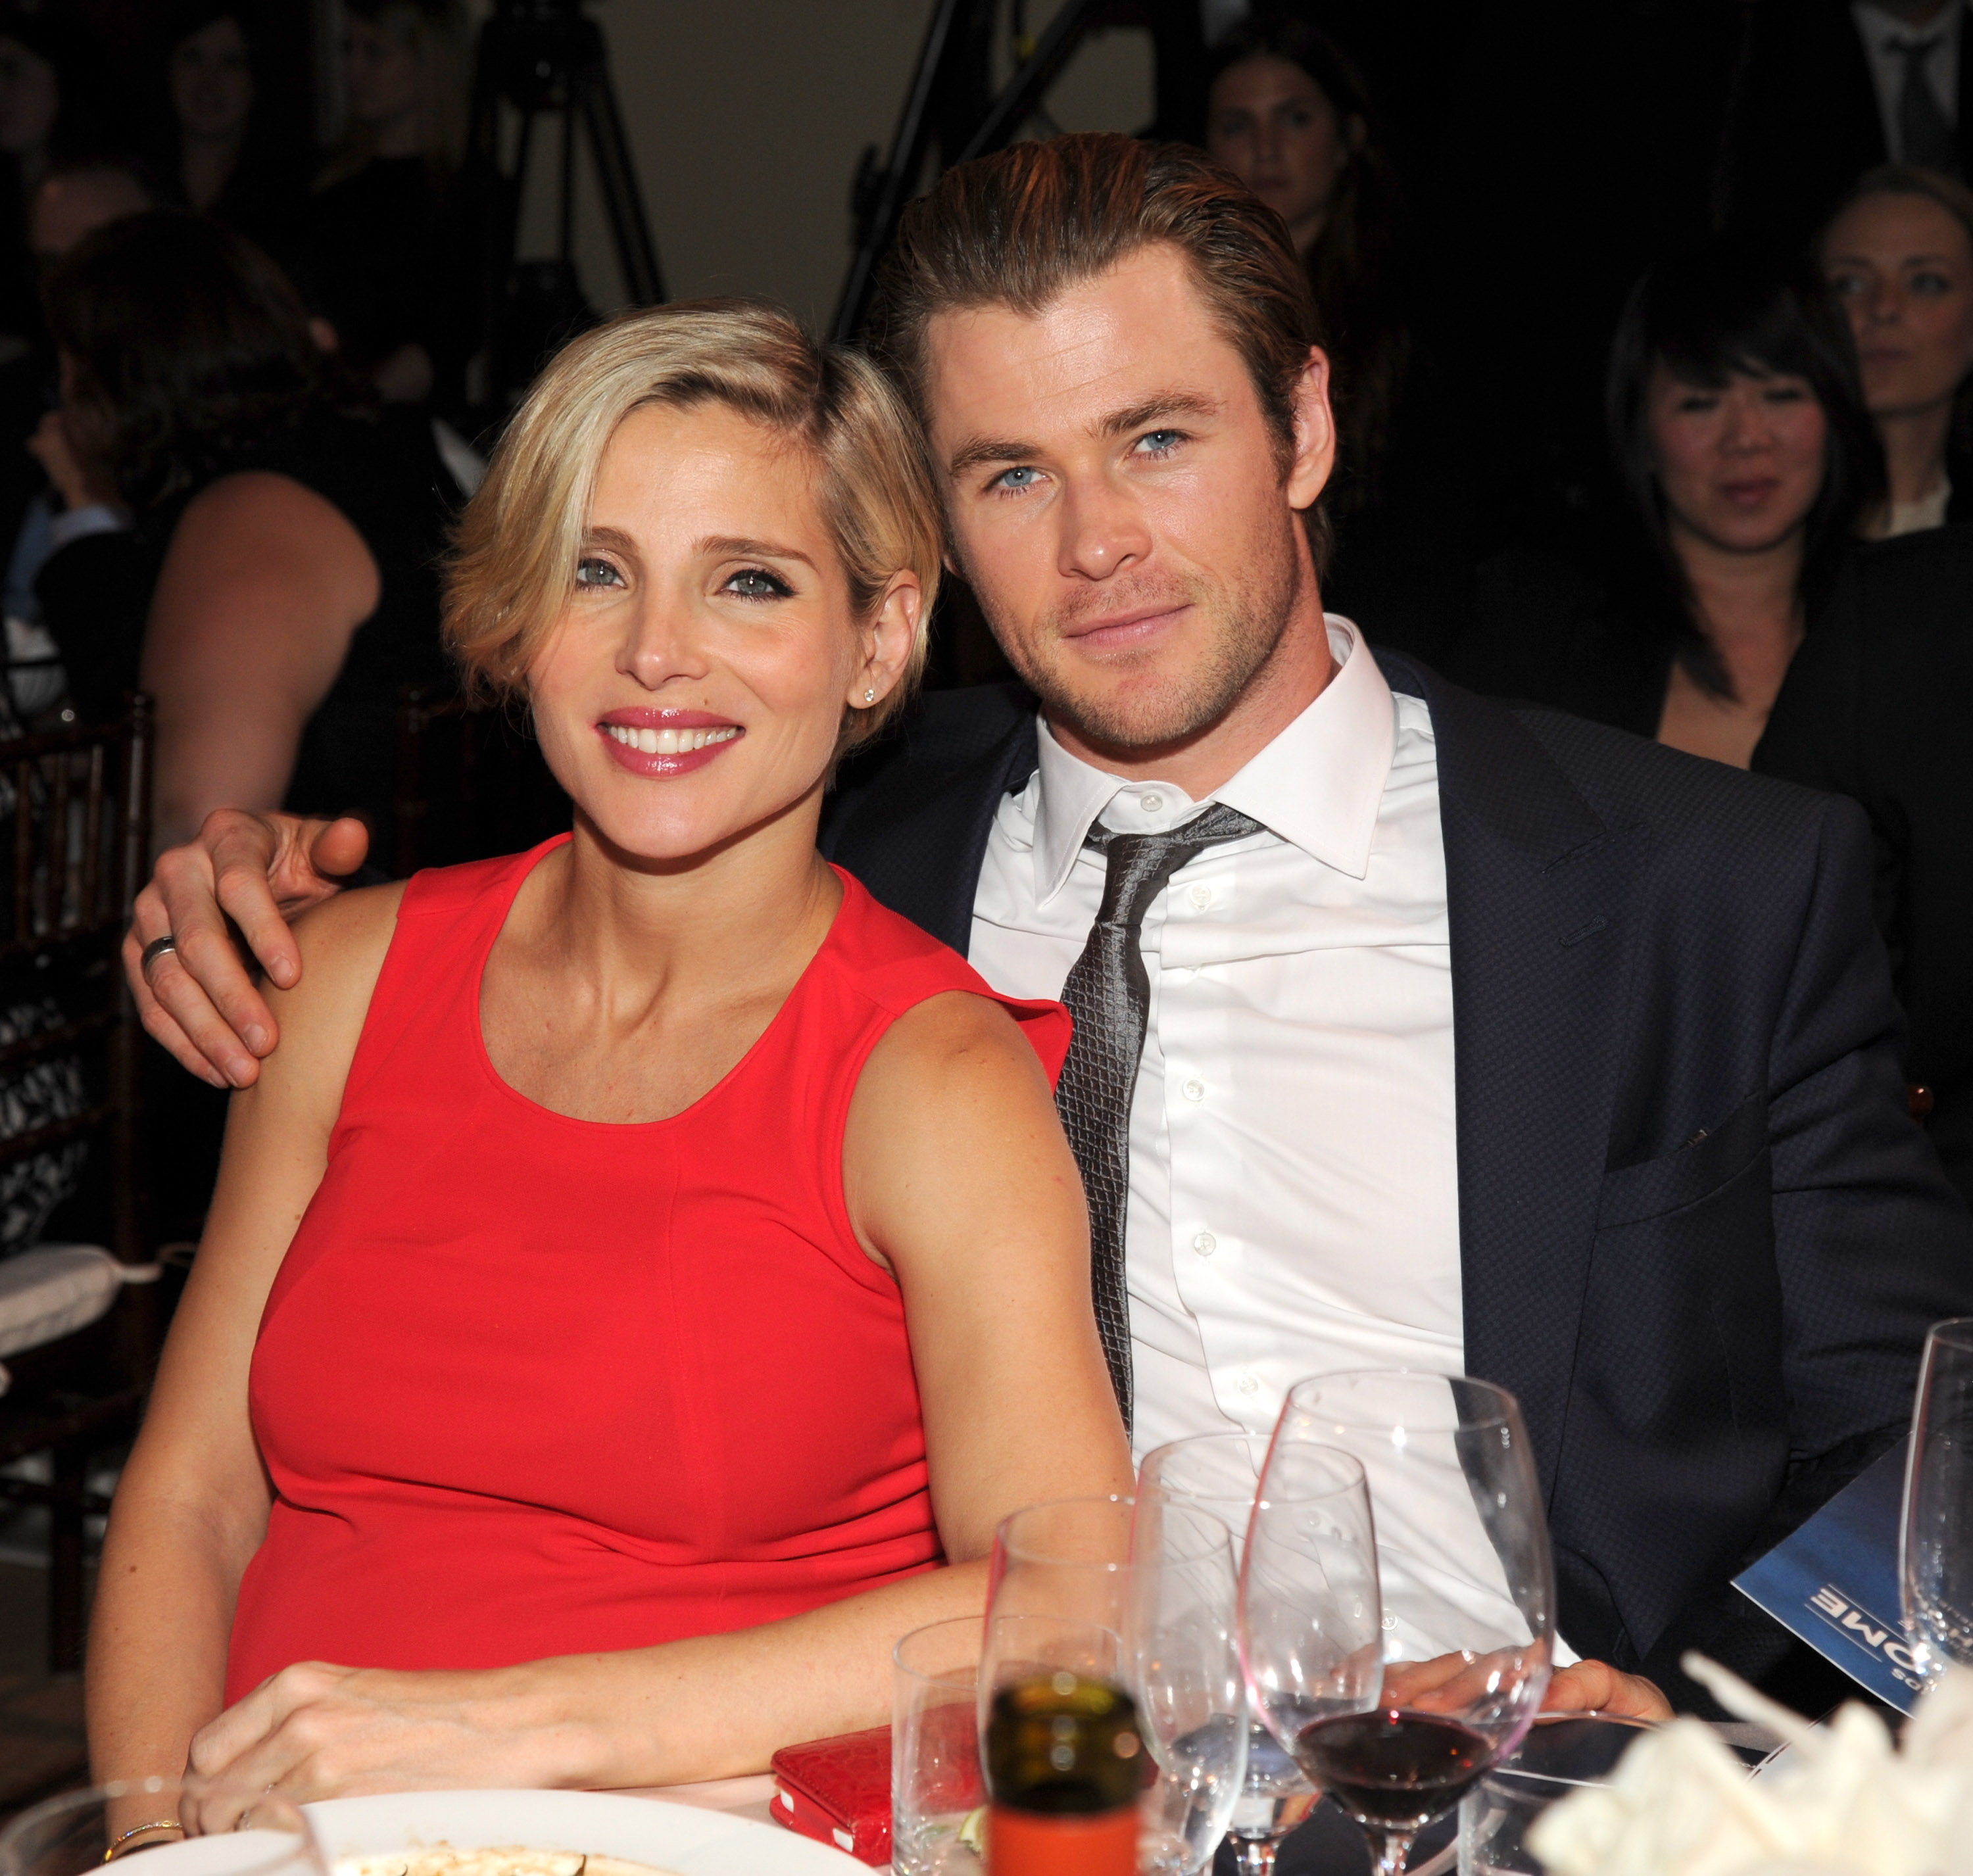 Chris Hemsworth and Elsa Pataky in Los Angeles in 2014 | Source: Getty Images